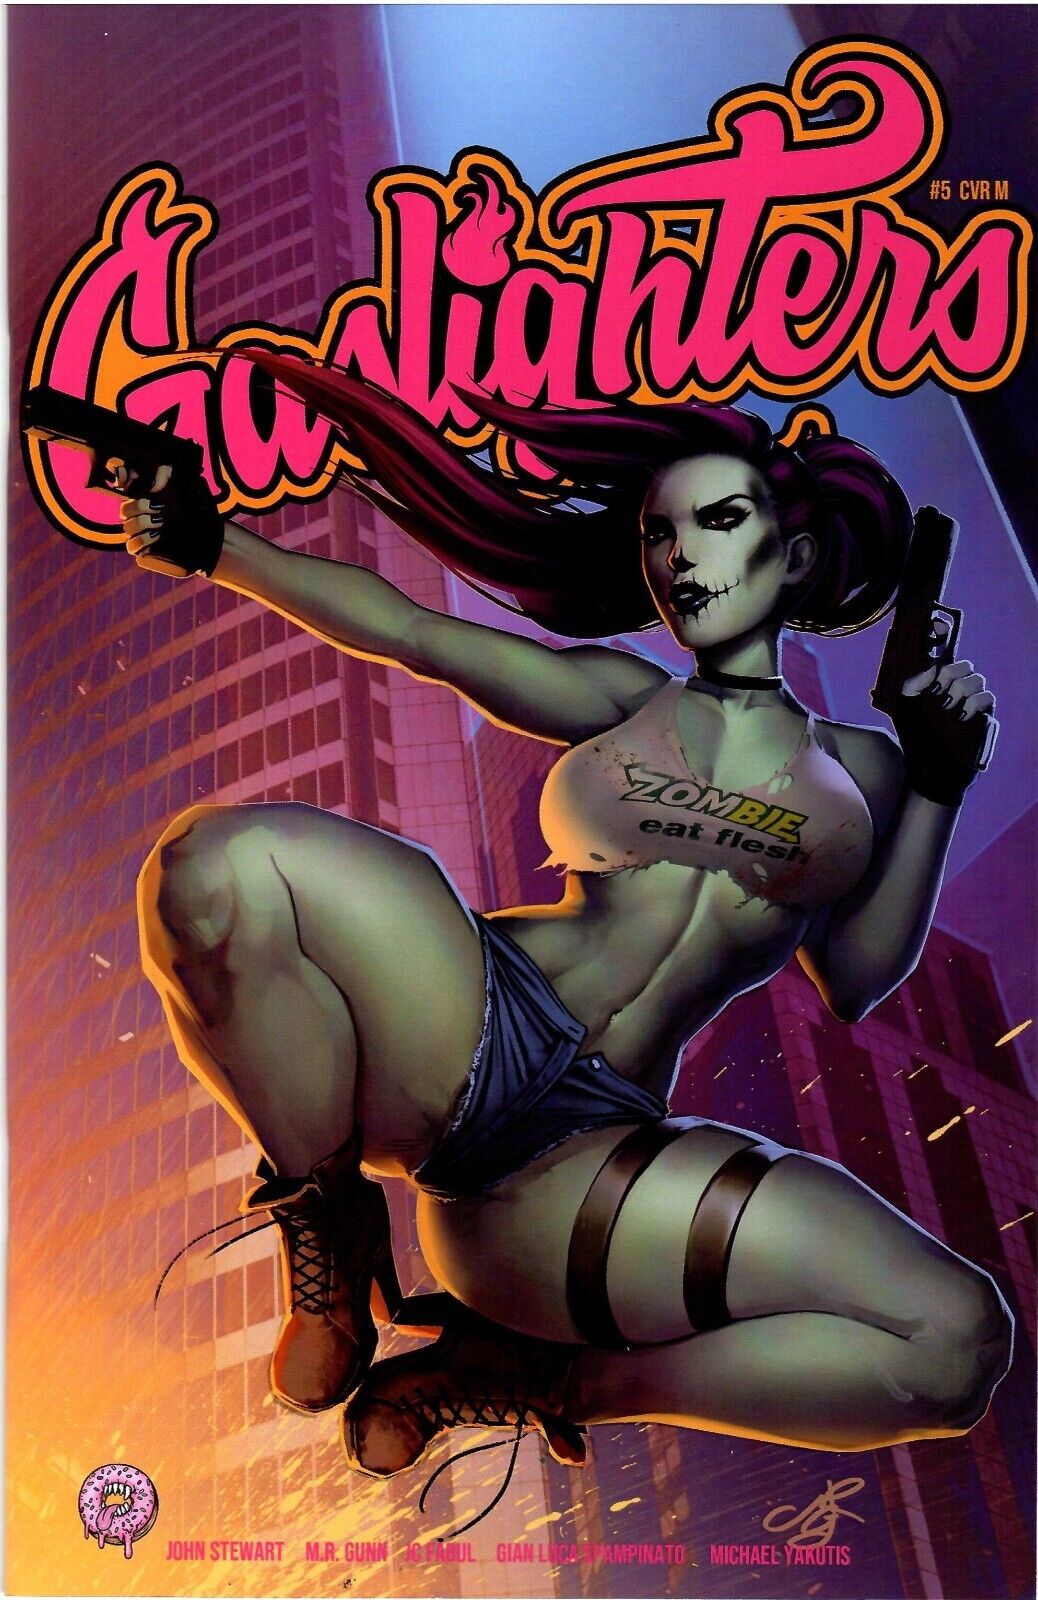 Gaslighters #5 Cover M M.R. Gunn Limited to 45 Copies NM